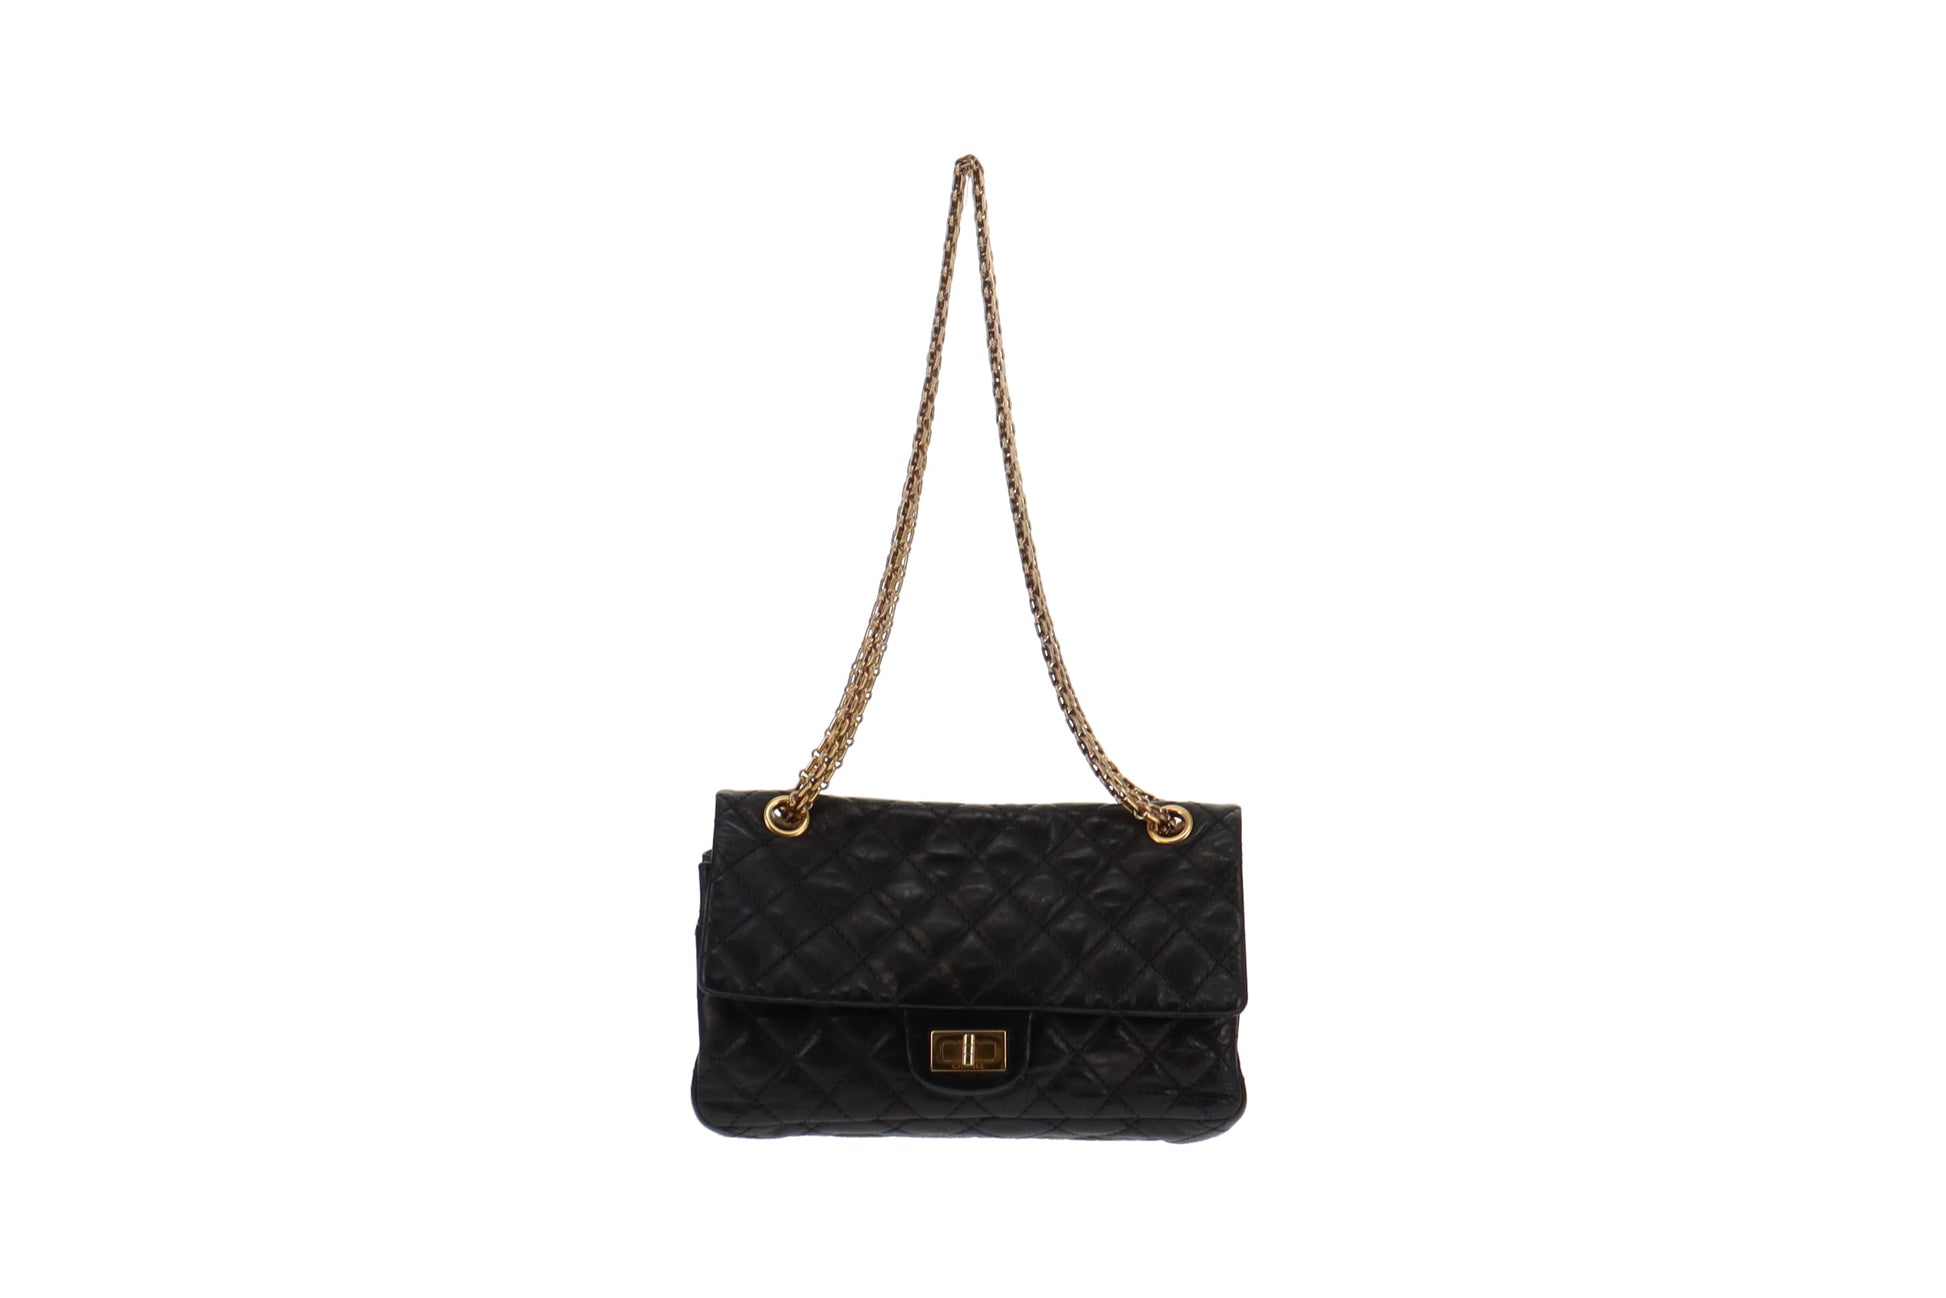 Chanel Black Calfskin Leather Quilted World Coin Charm Flap Bag